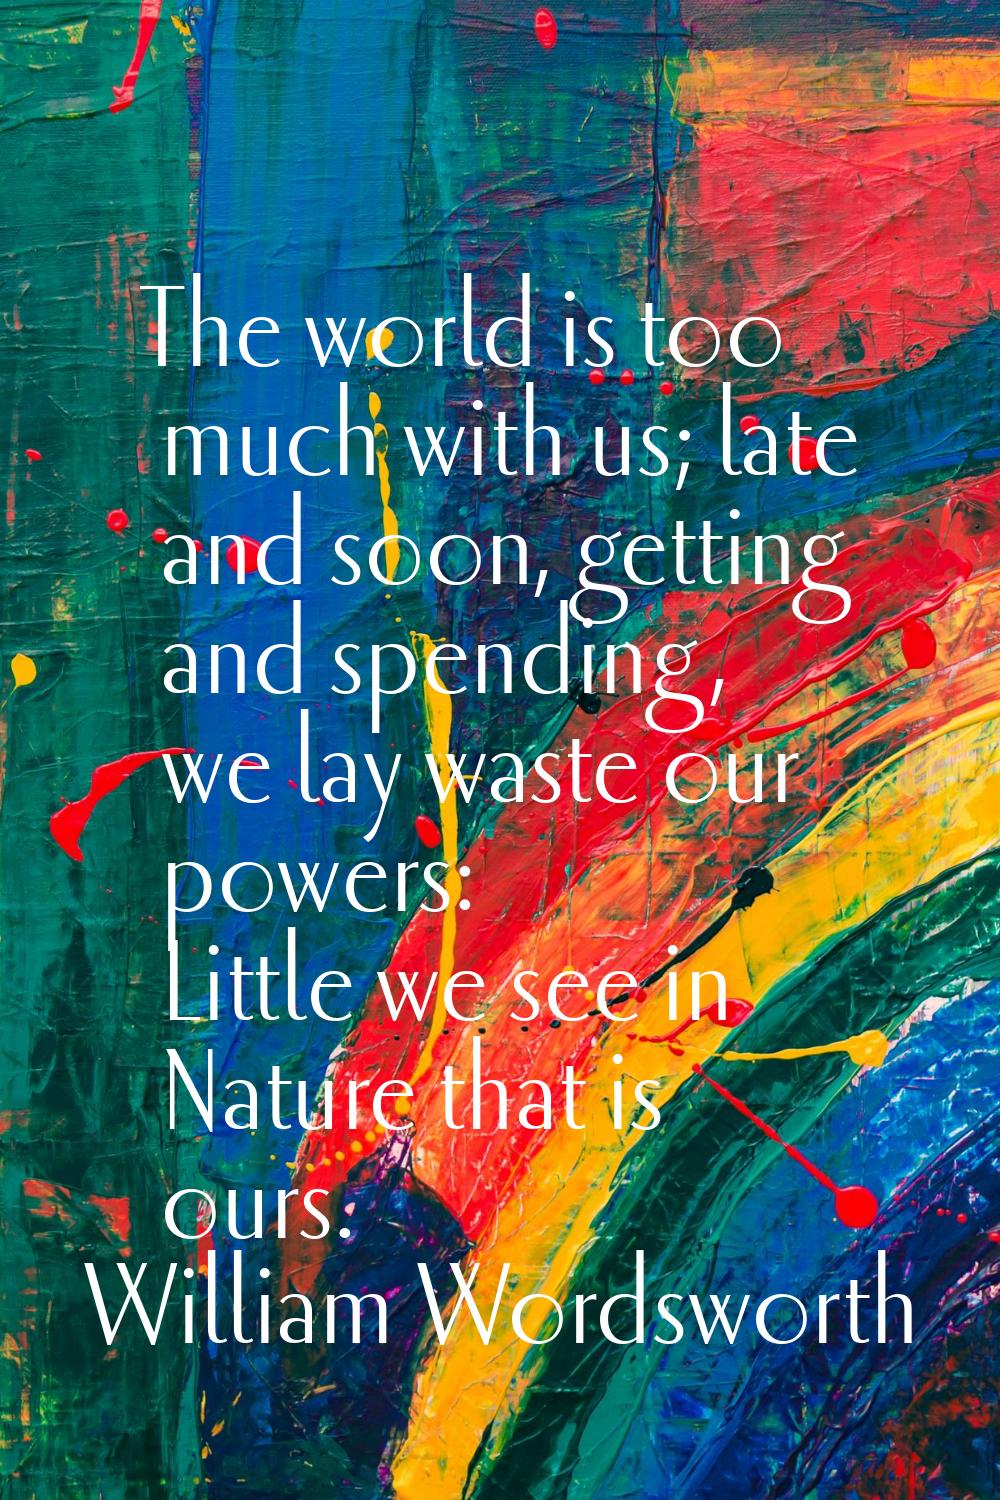 The world is too much with us; late and soon, getting and spending, we lay waste our powers: Little